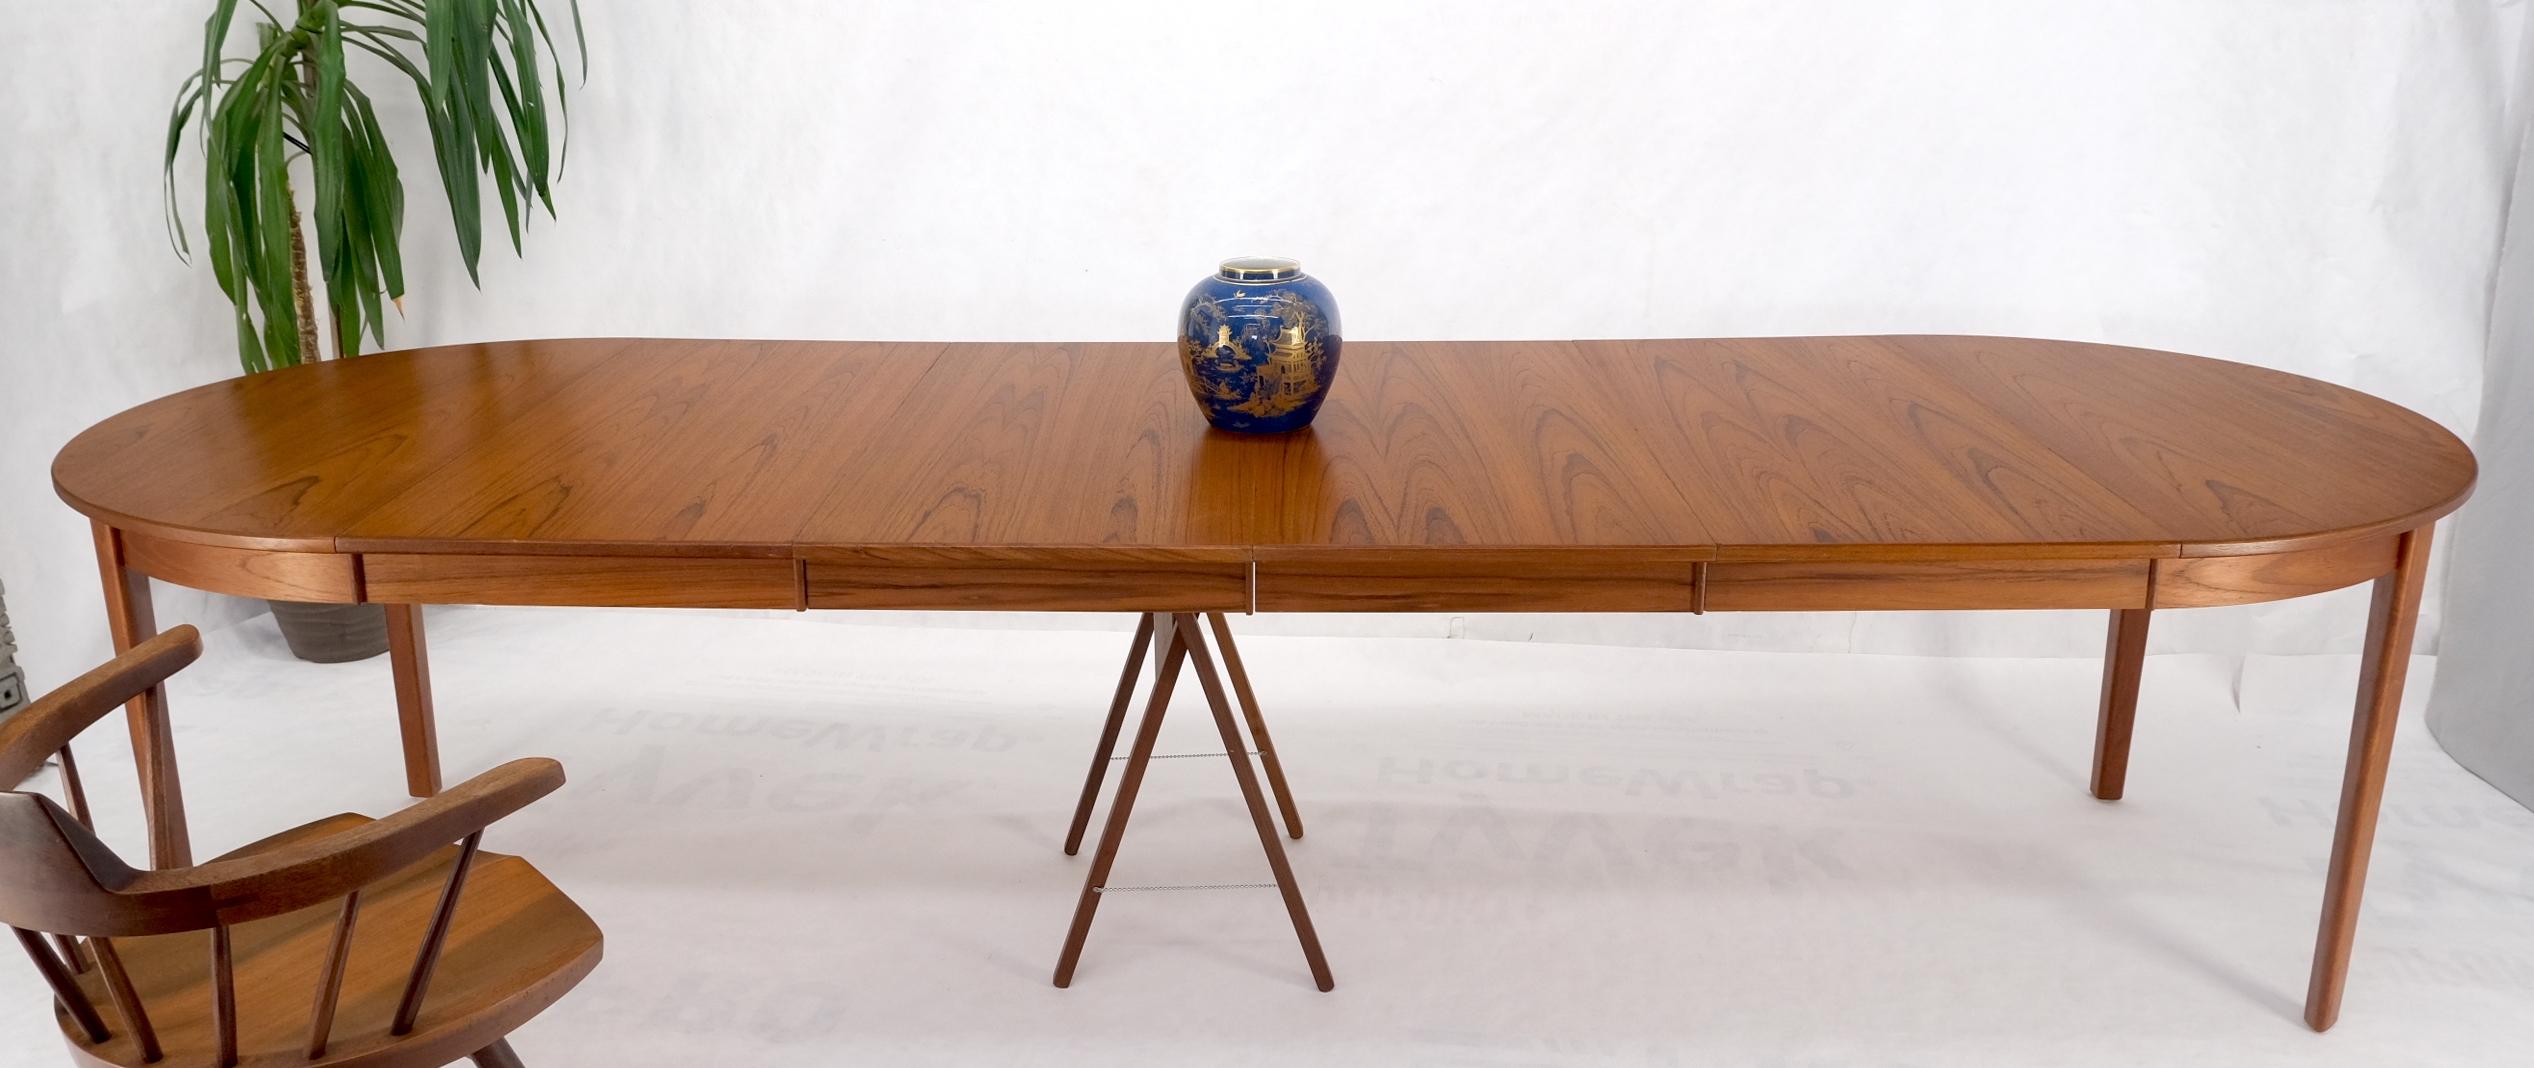 Mid-Century Modern Danish Teak Mid Century Modern Round Dining Banquet Conference Table 4 Leaf MINT For Sale